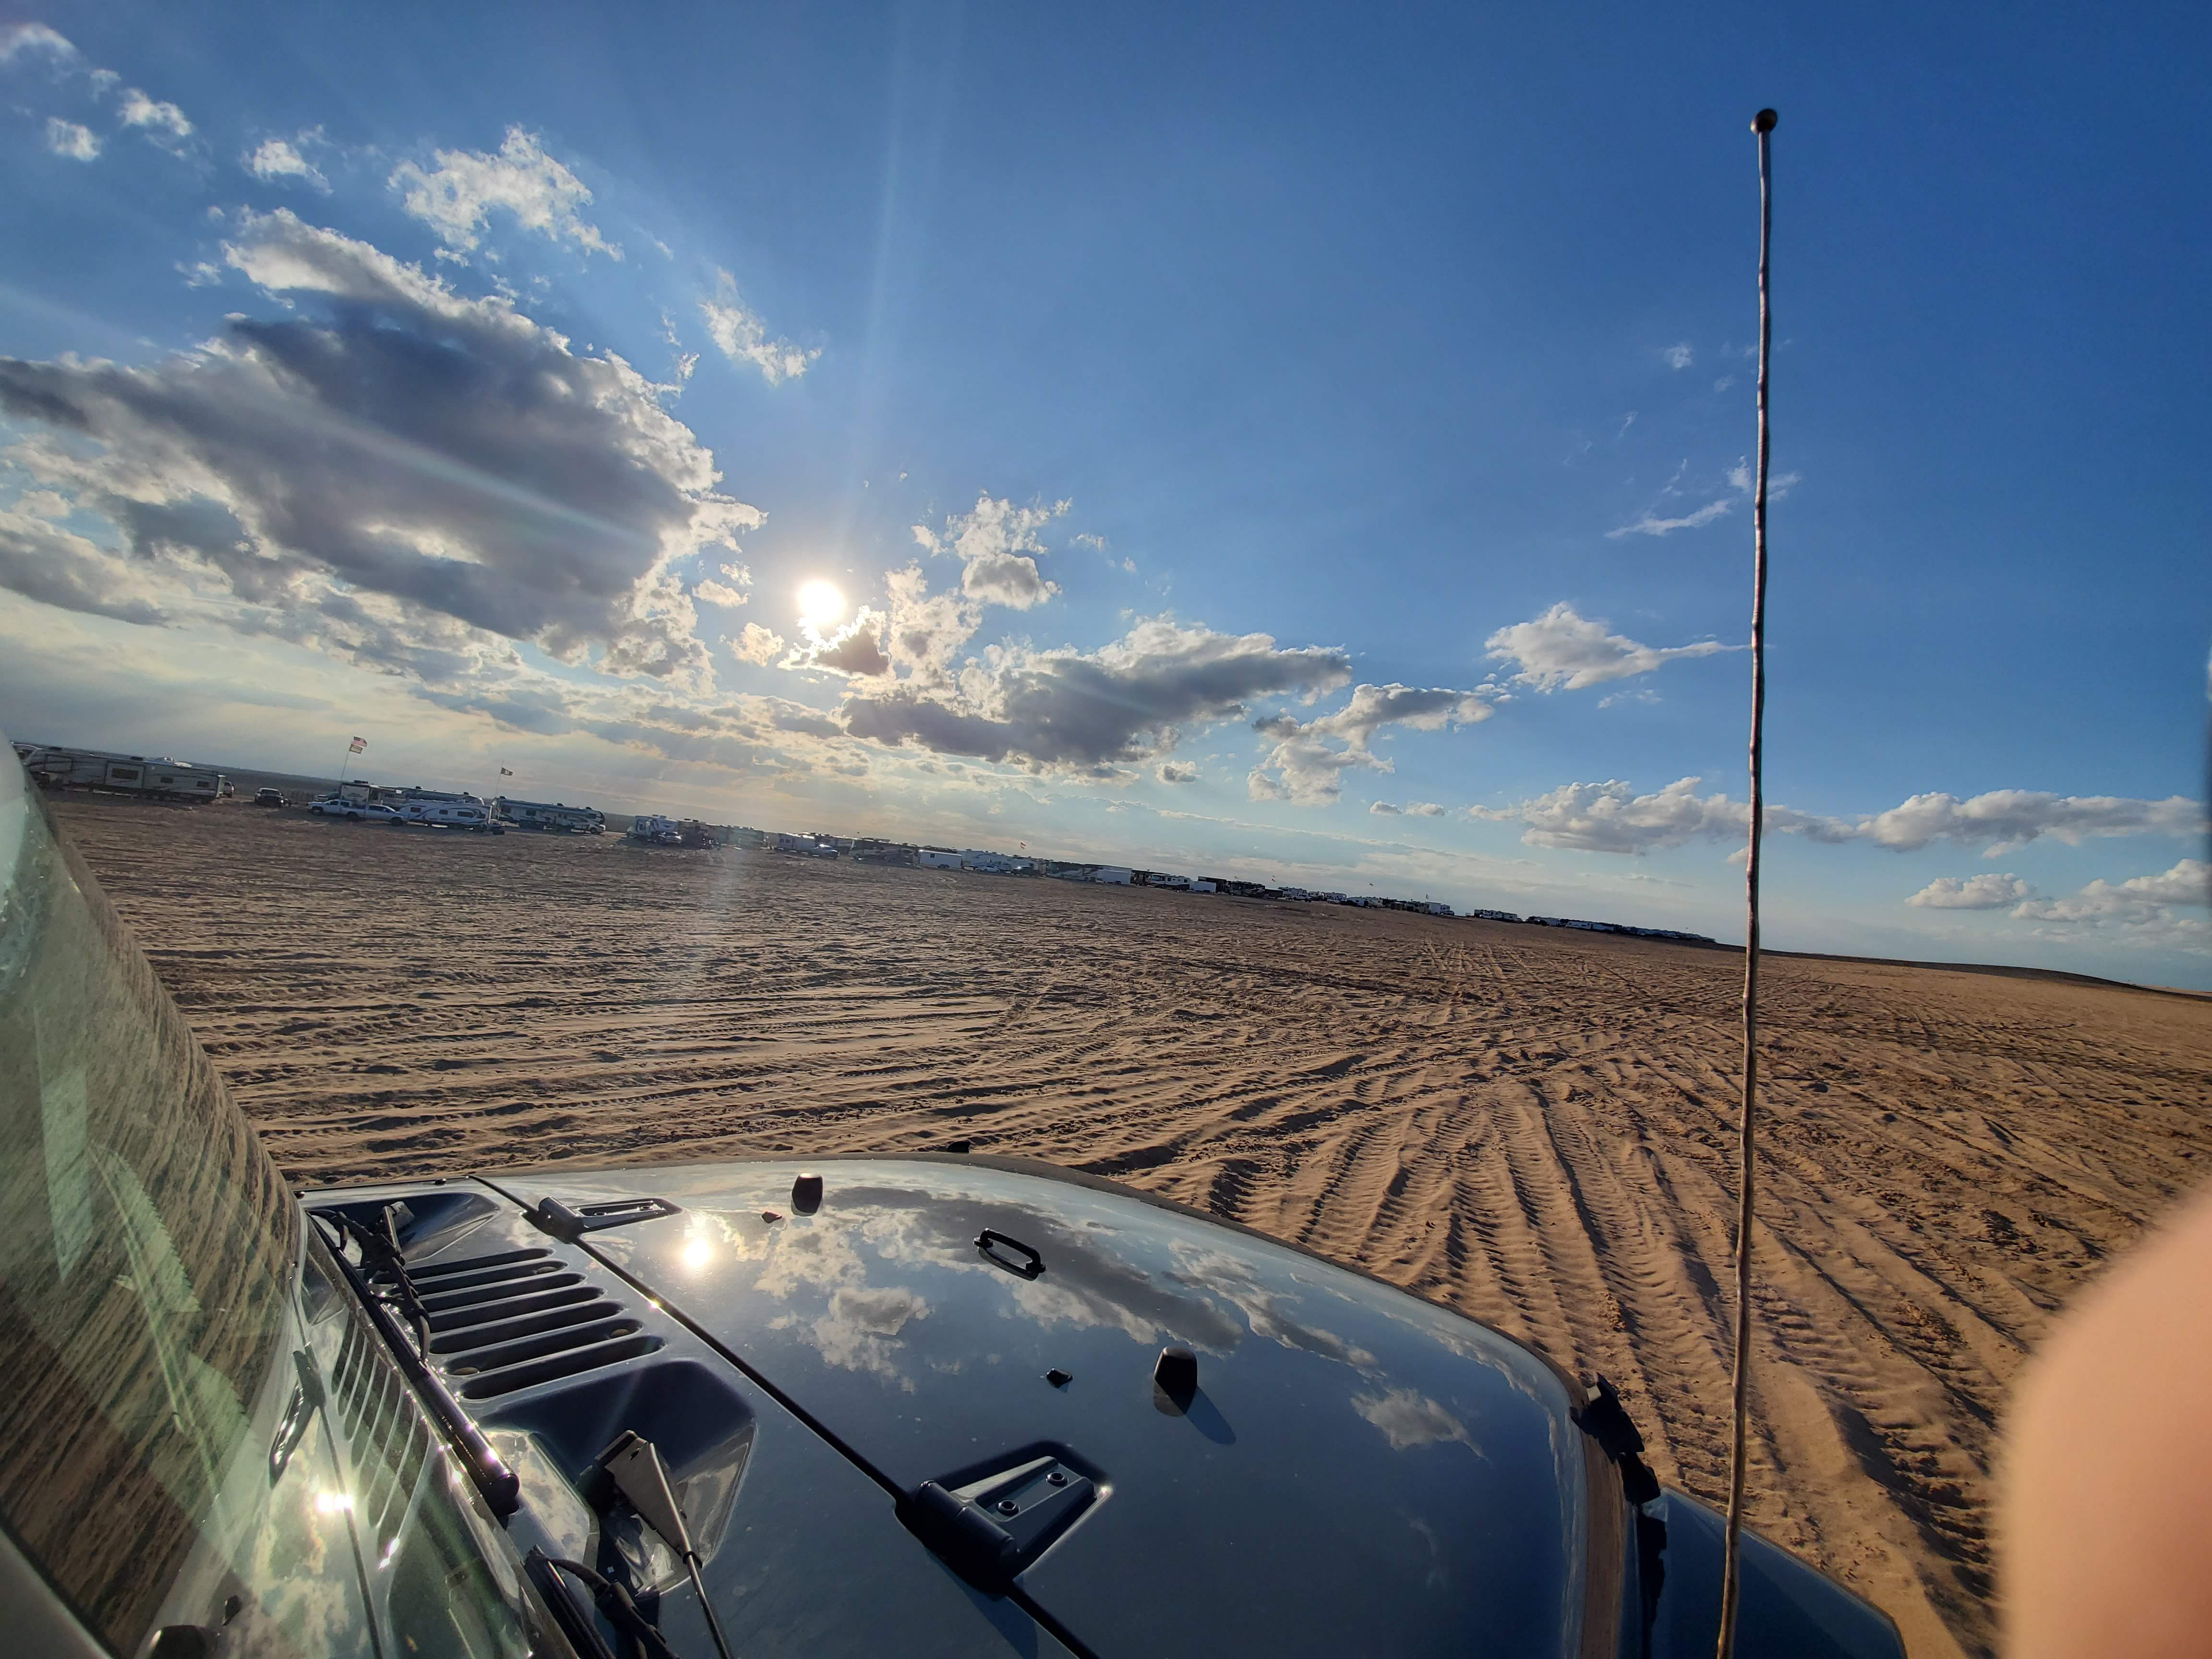 Off highway vehicle at Glamis Dunes in Imperial, California